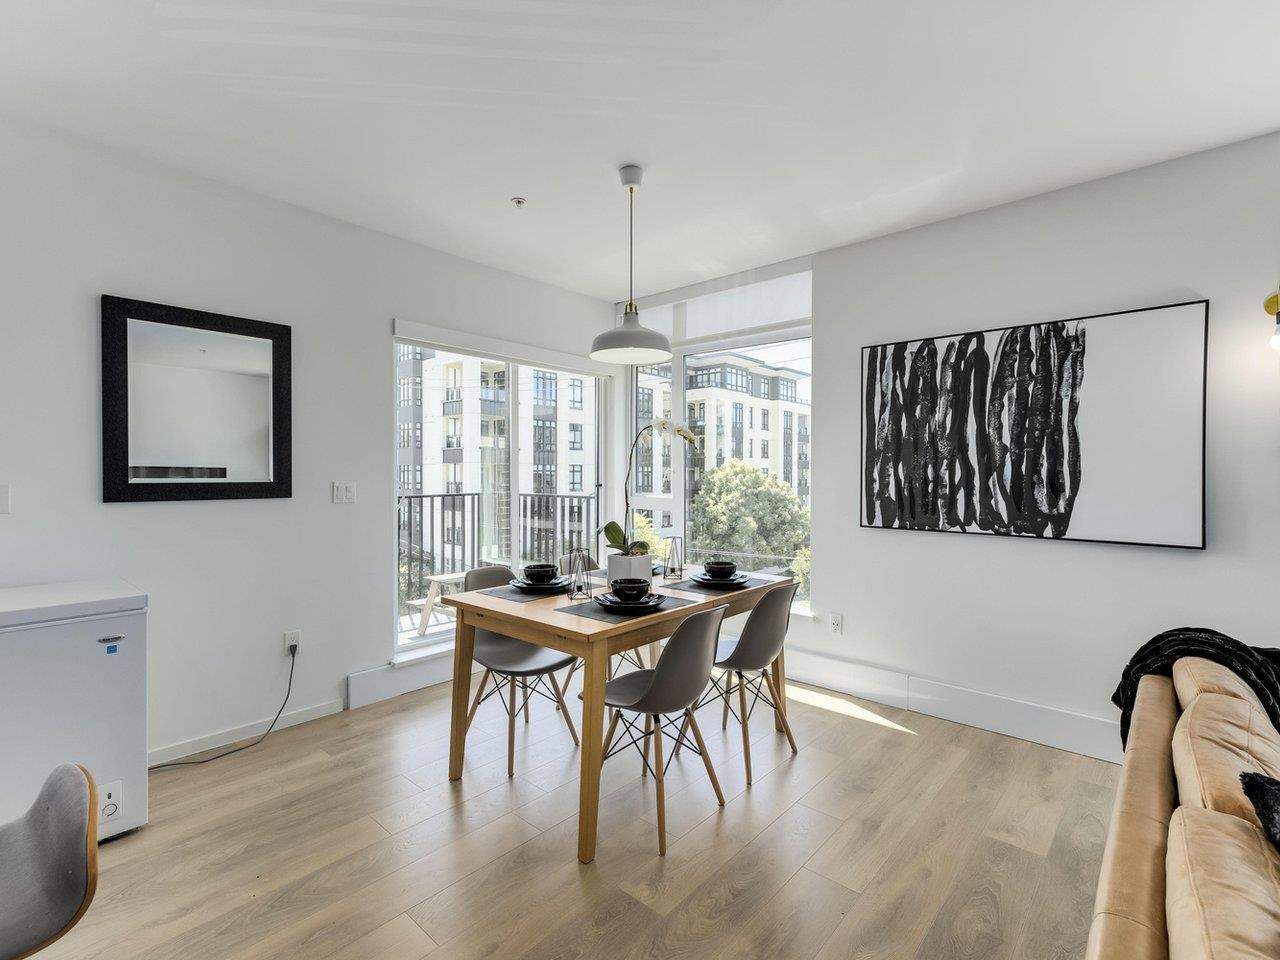 Photo 9: Photos: 305 5085 MAIN STREET in Vancouver: Main Condo for sale (Vancouver East)  : MLS®# R2585433